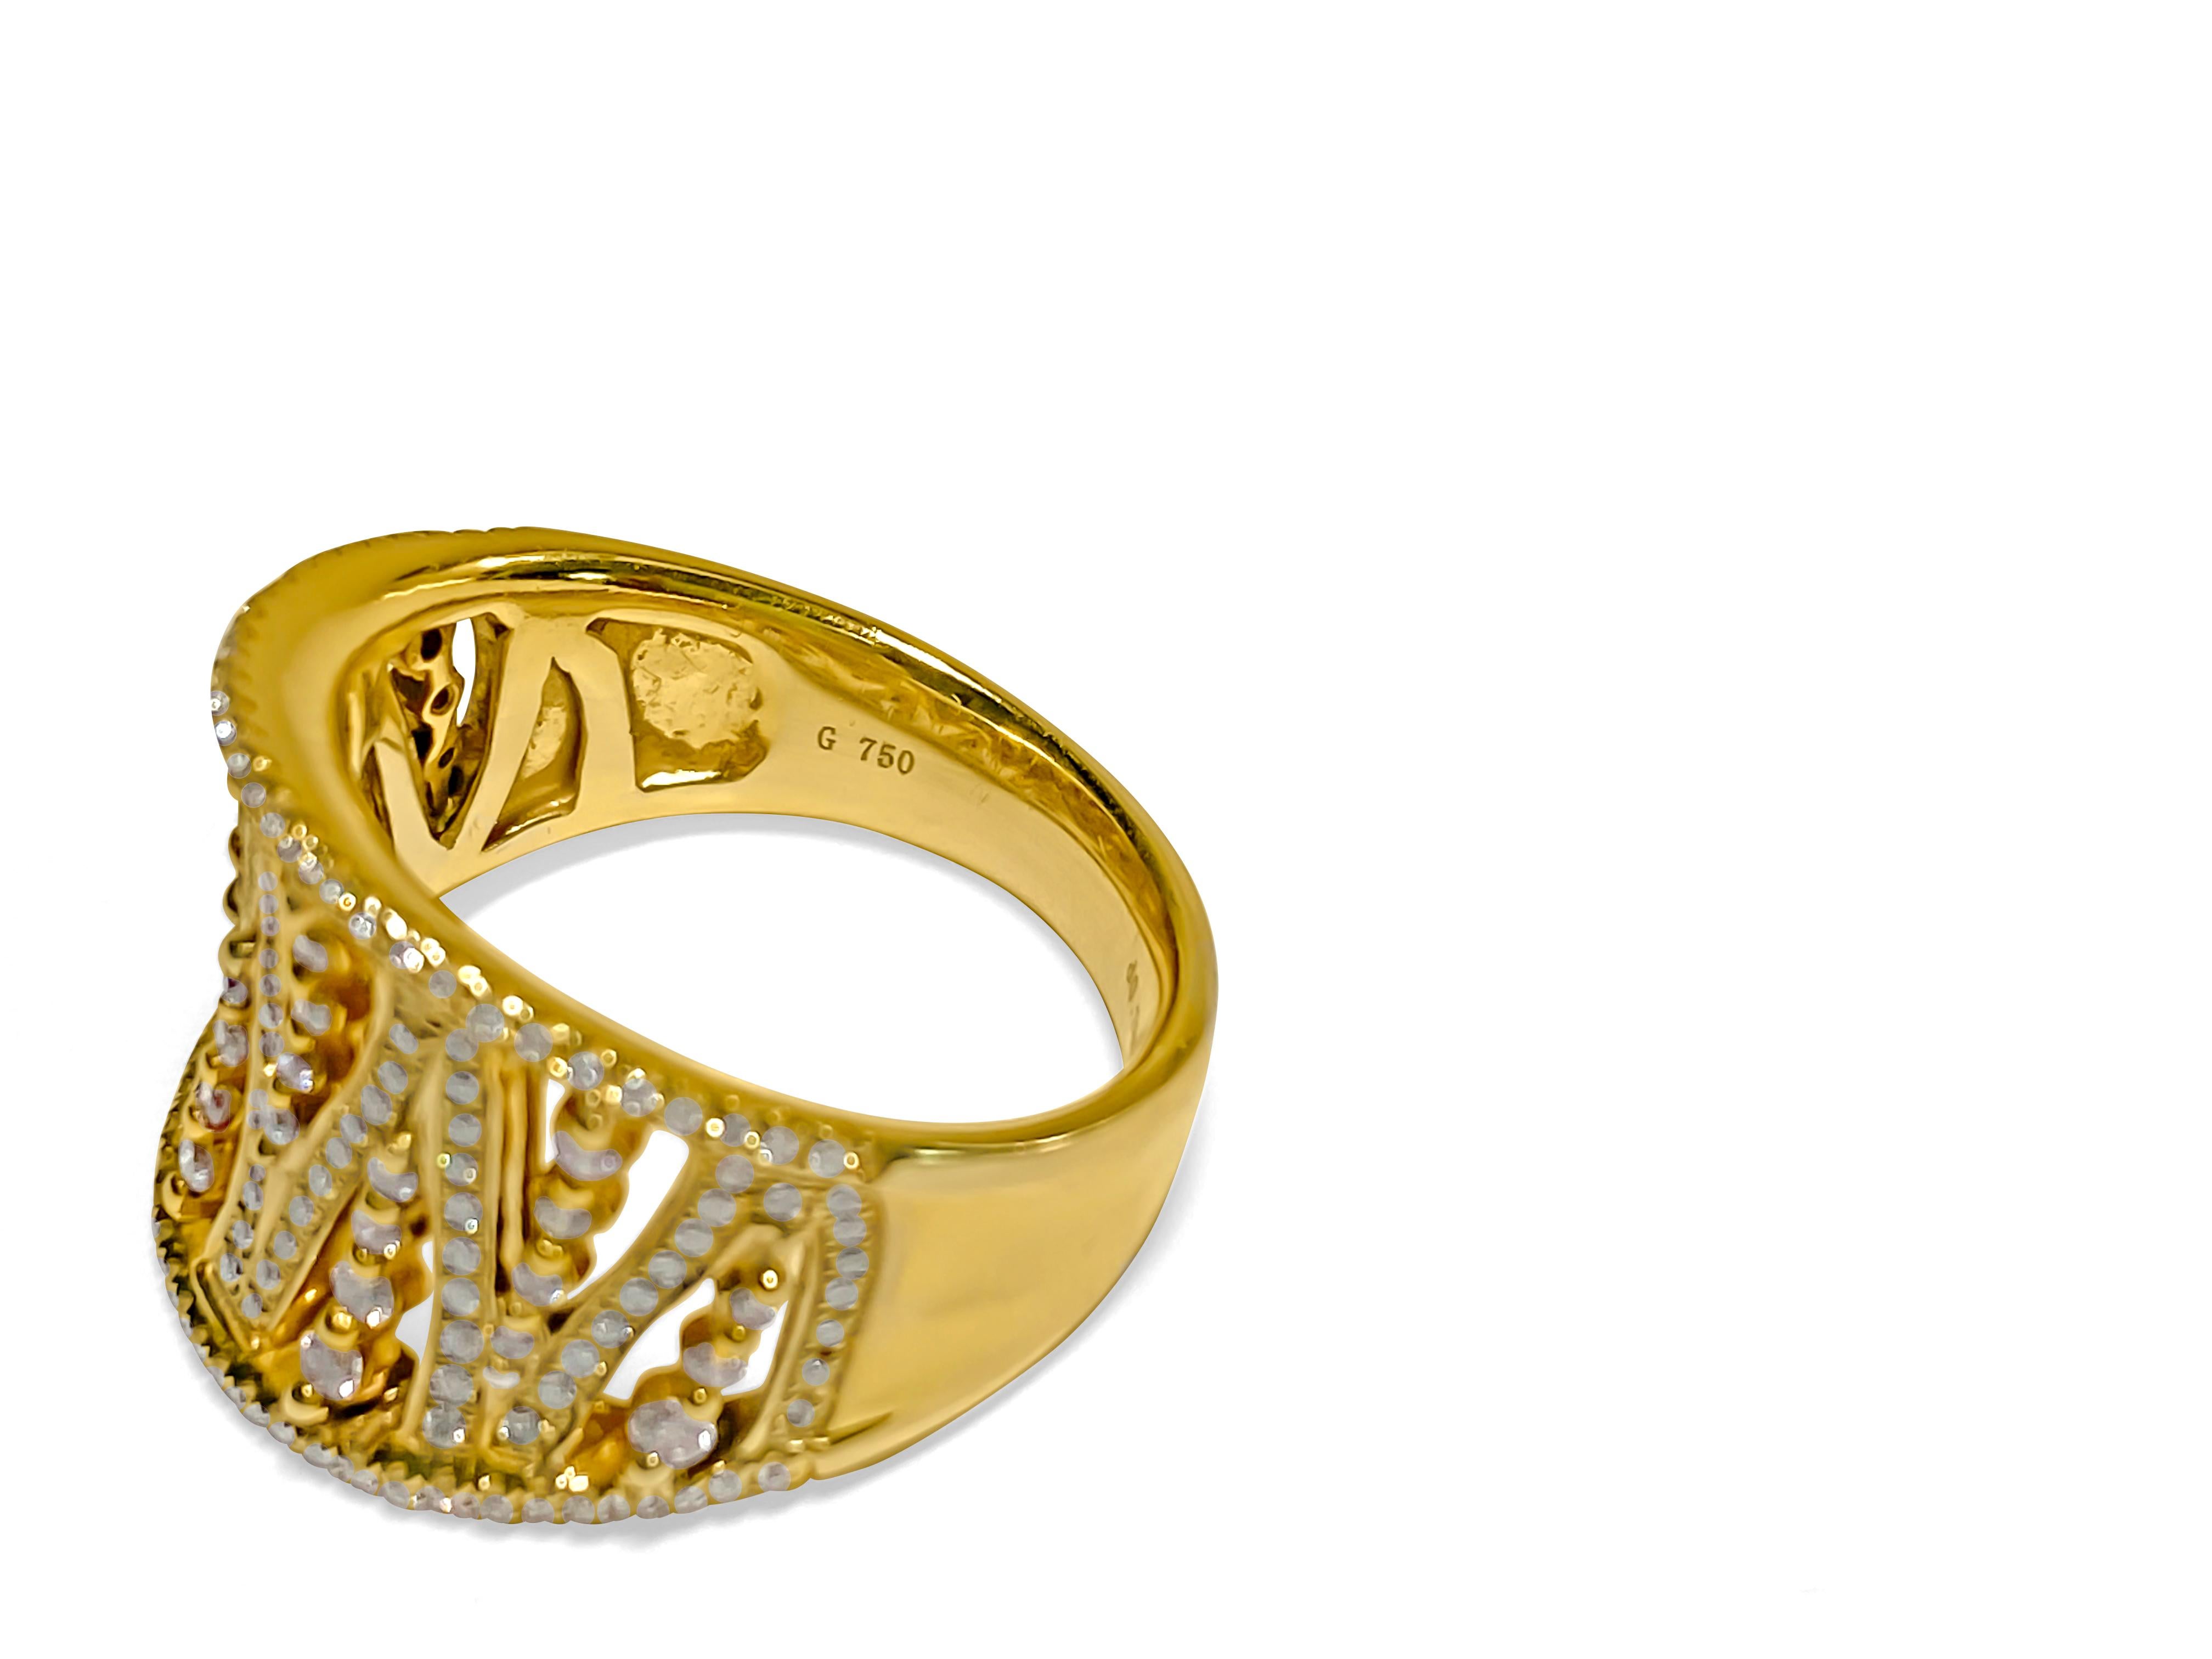 Modern 0.786 Carat Diamond 18 Karat Gold Band Ring In Excellent Condition For Sale In Miami, FL